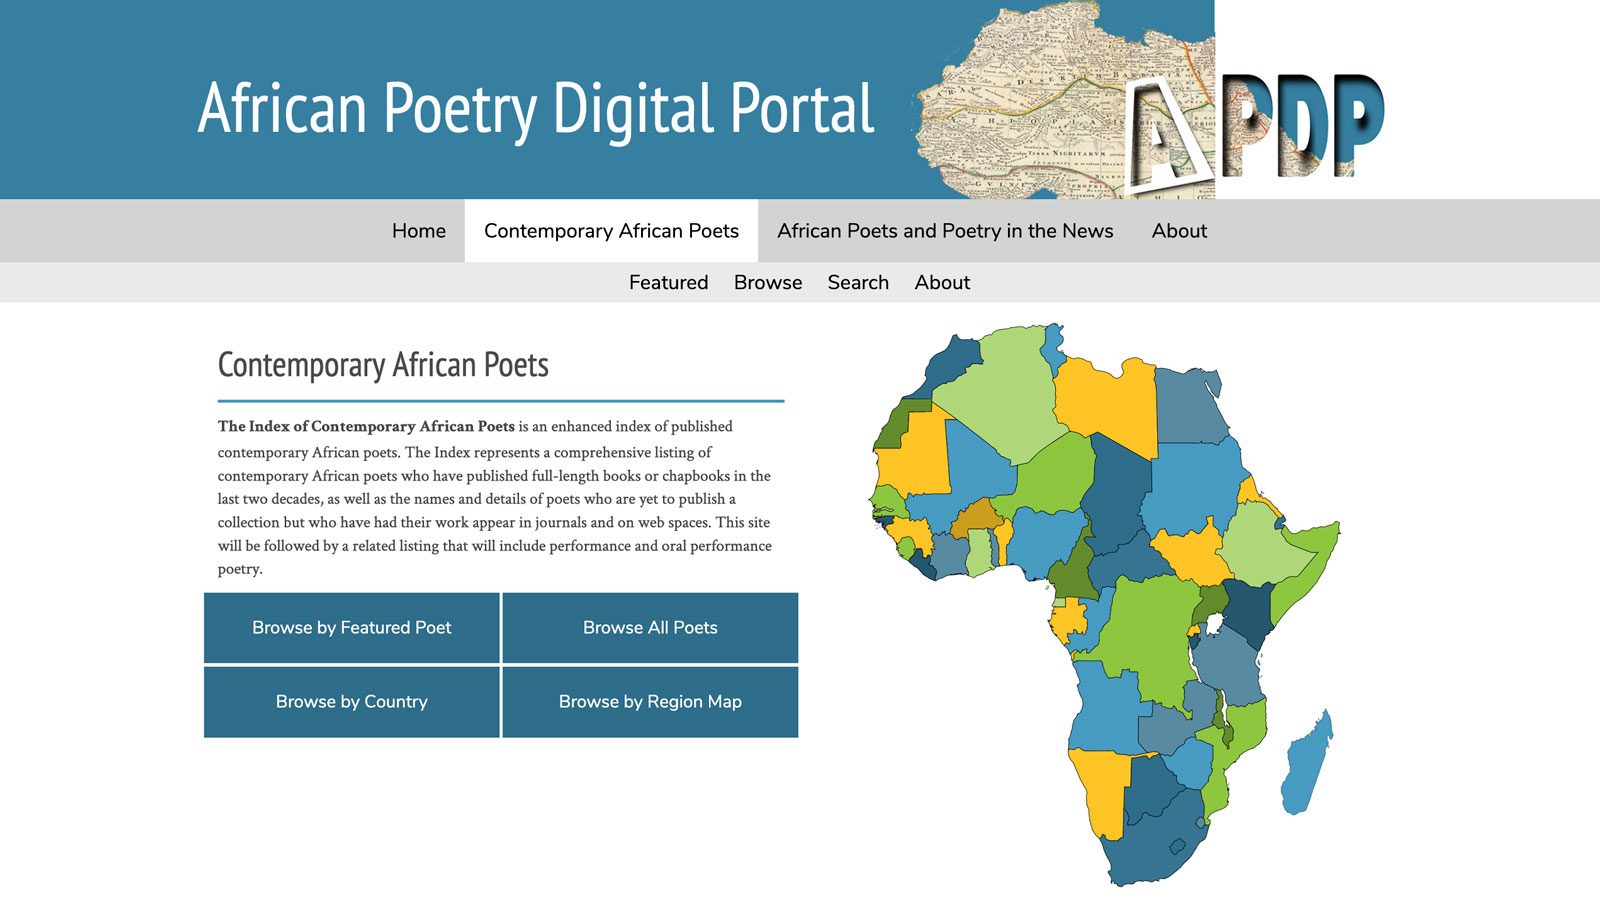 Index of Contemporary African Poets homepage with map of Africa; links to news story